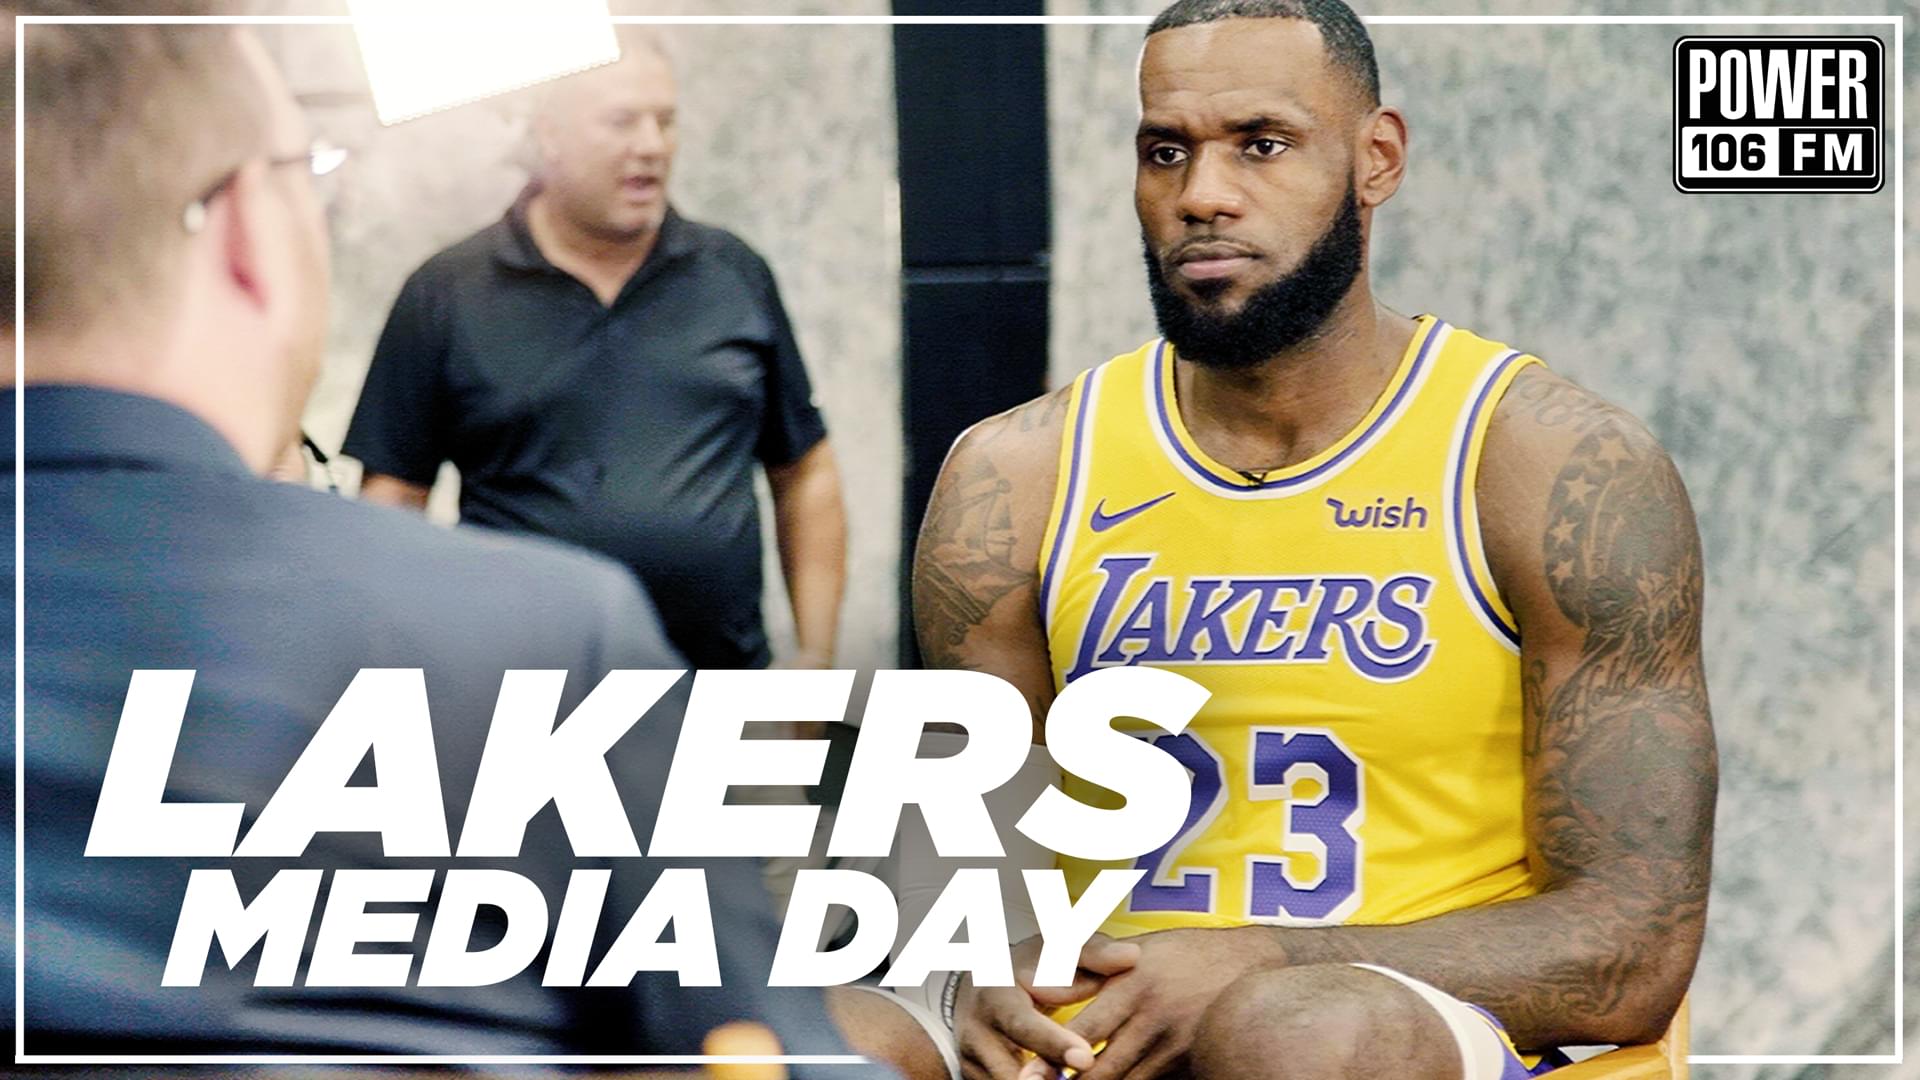 Lakers Media Day 2018 With LeBron & Team On Upcoming Season [WATCH]